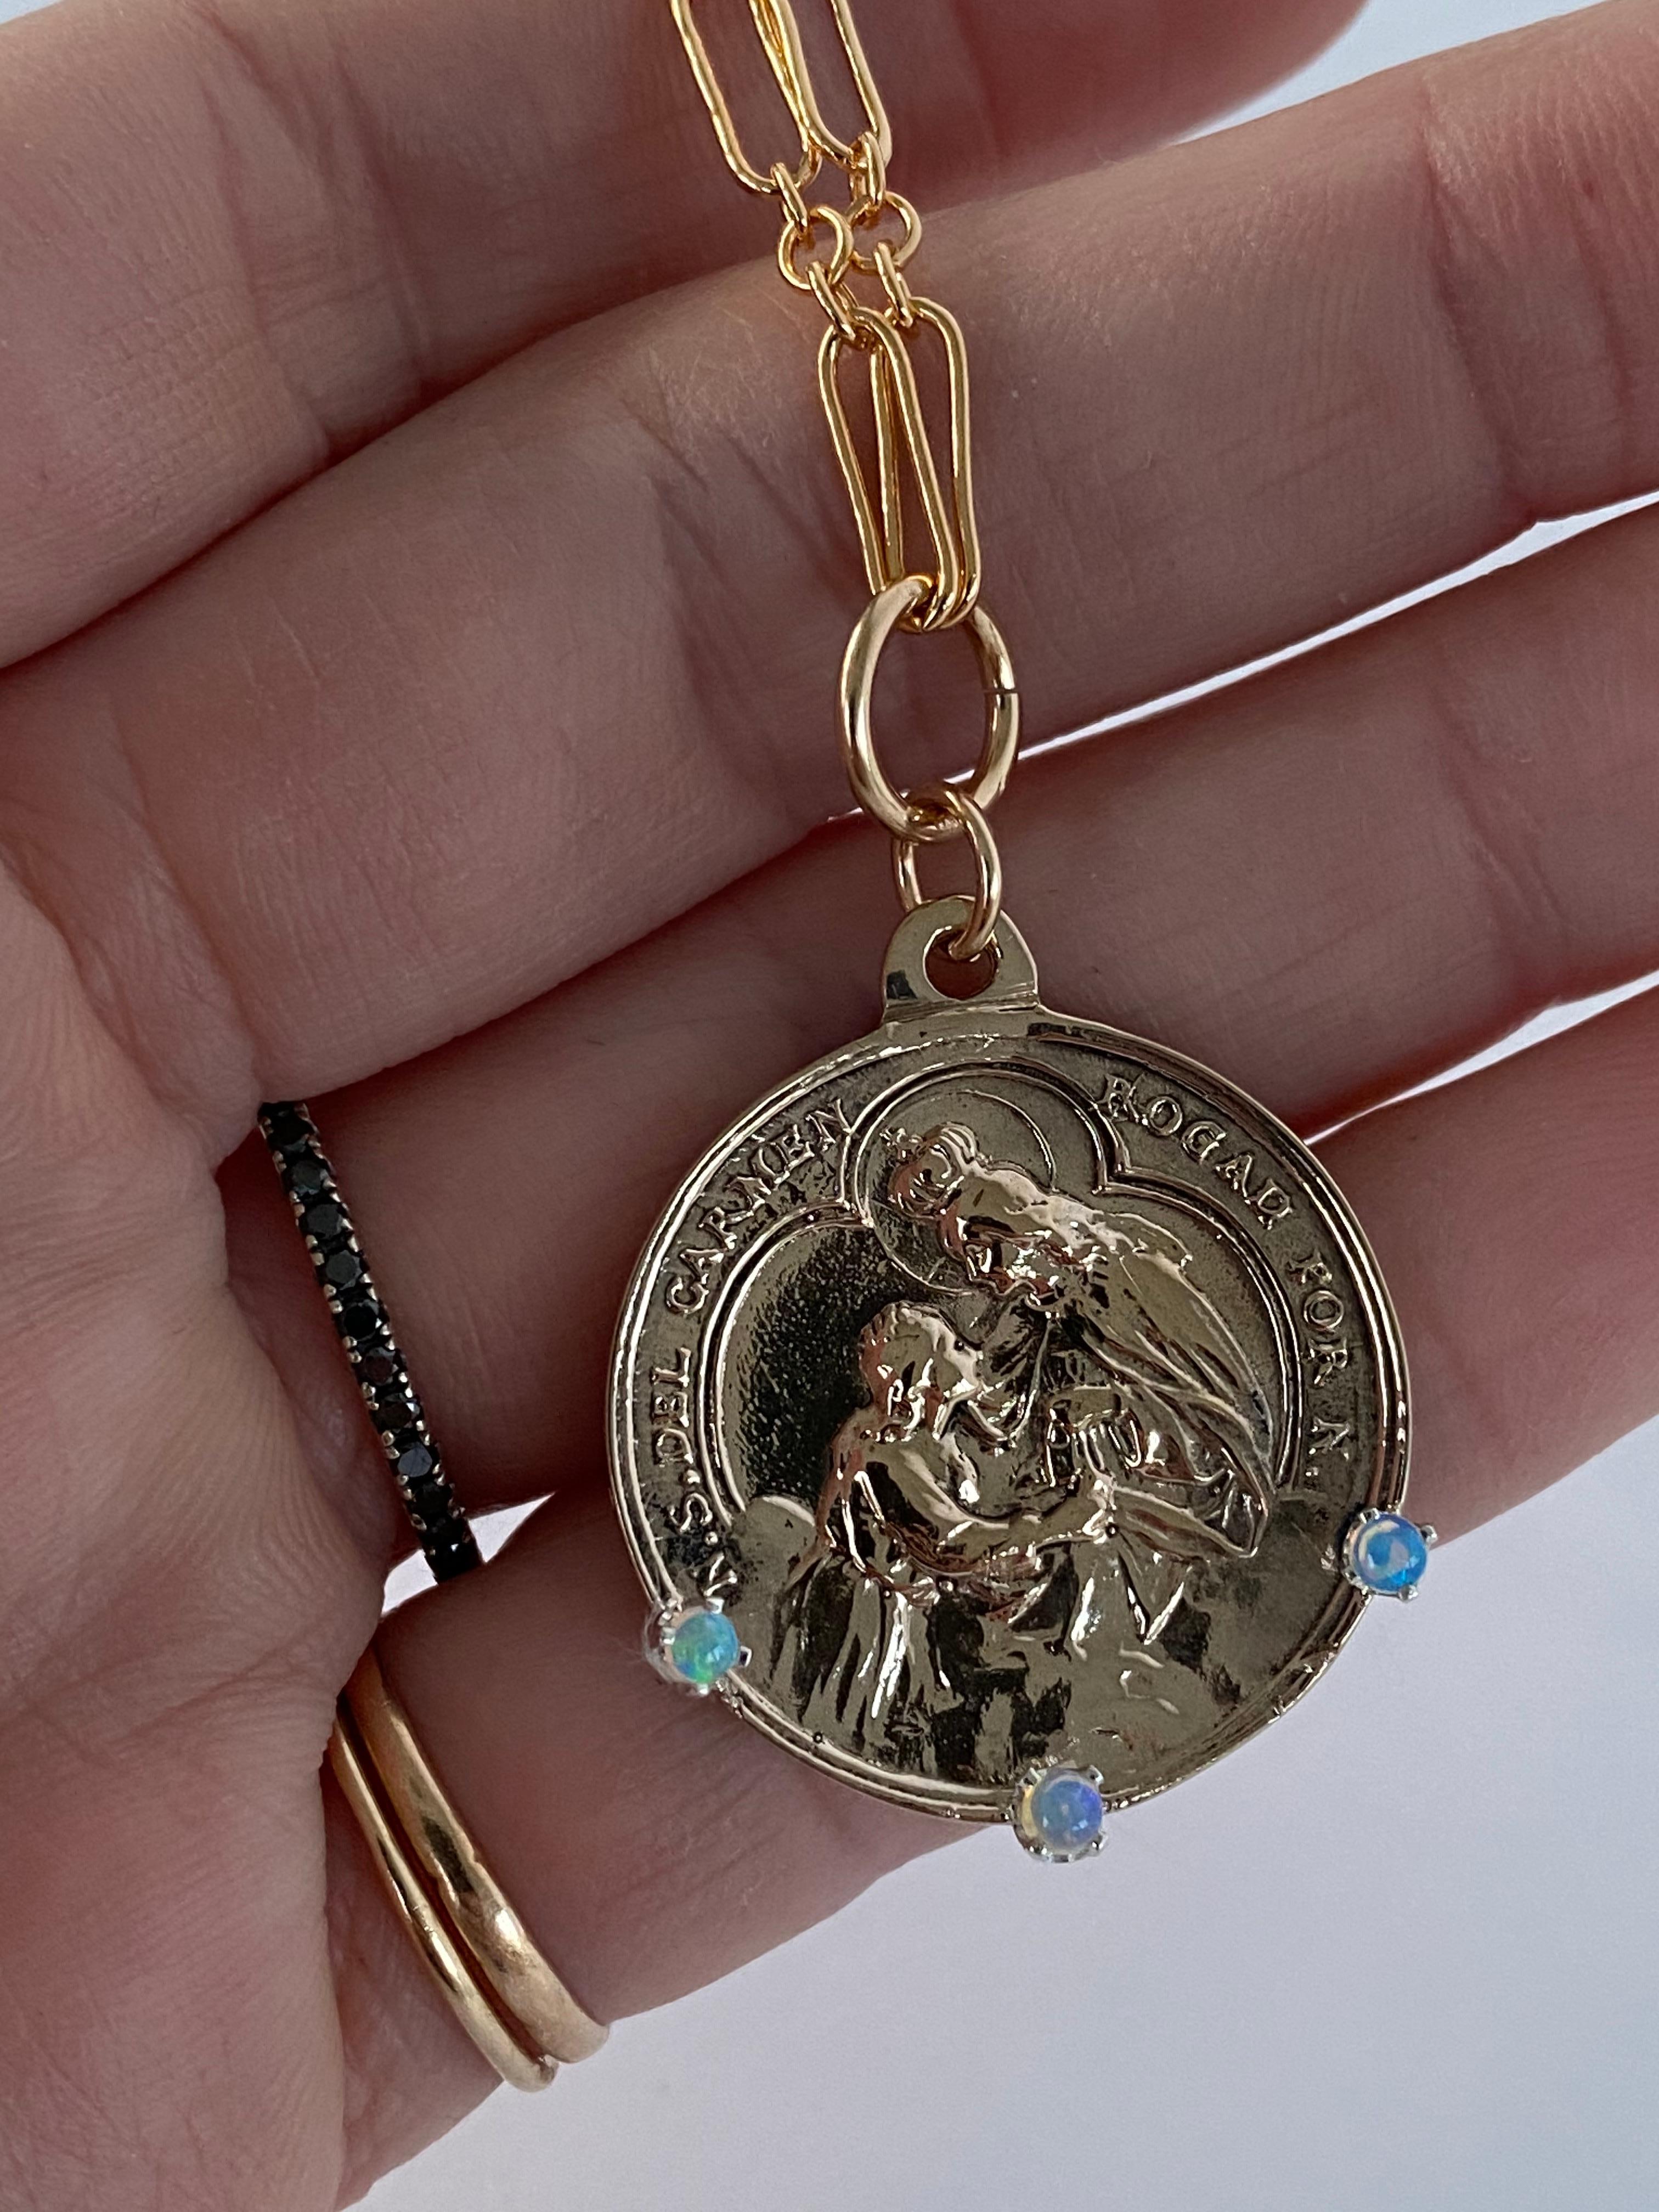 Opal Medal Long Chain Necklace Virgin Mary Pendant Gold Vermeil J Dauphin For Sale 5